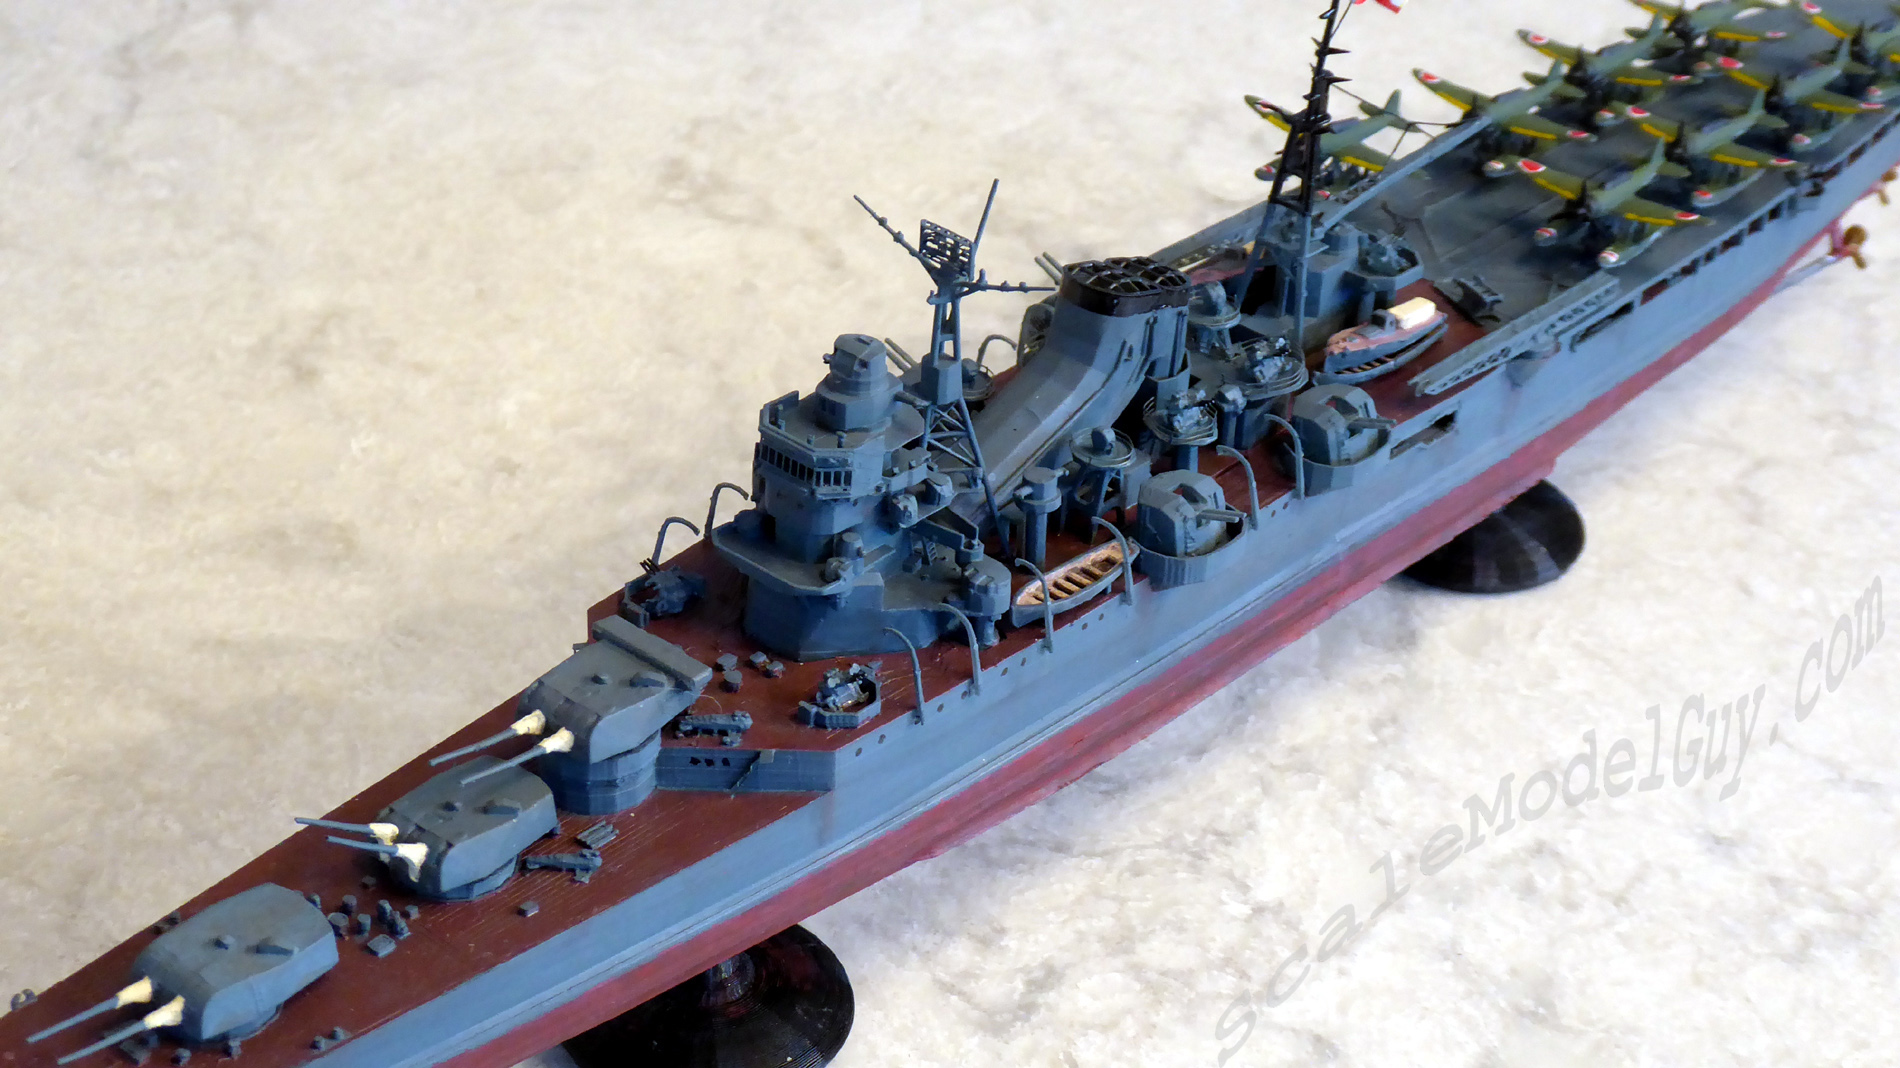 Aircraft Cruiser IJN Mogami 3D printed in 1/450 scale with LD-002r & Ender 3 Pro printers 